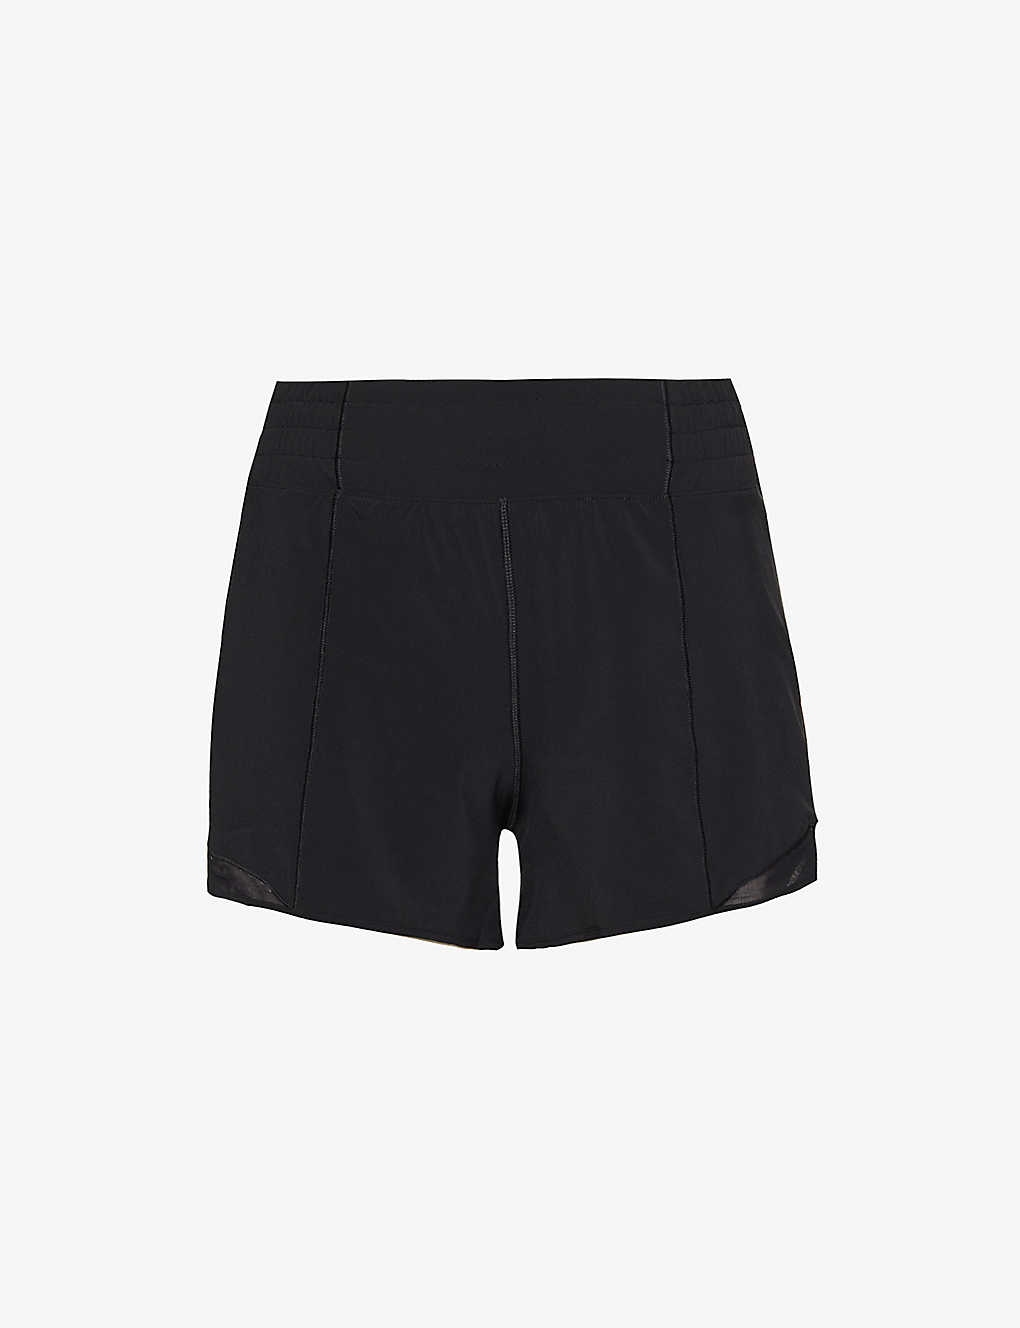 Lululemon Hotty Hot High-rise Lined Shorts 4" In Black